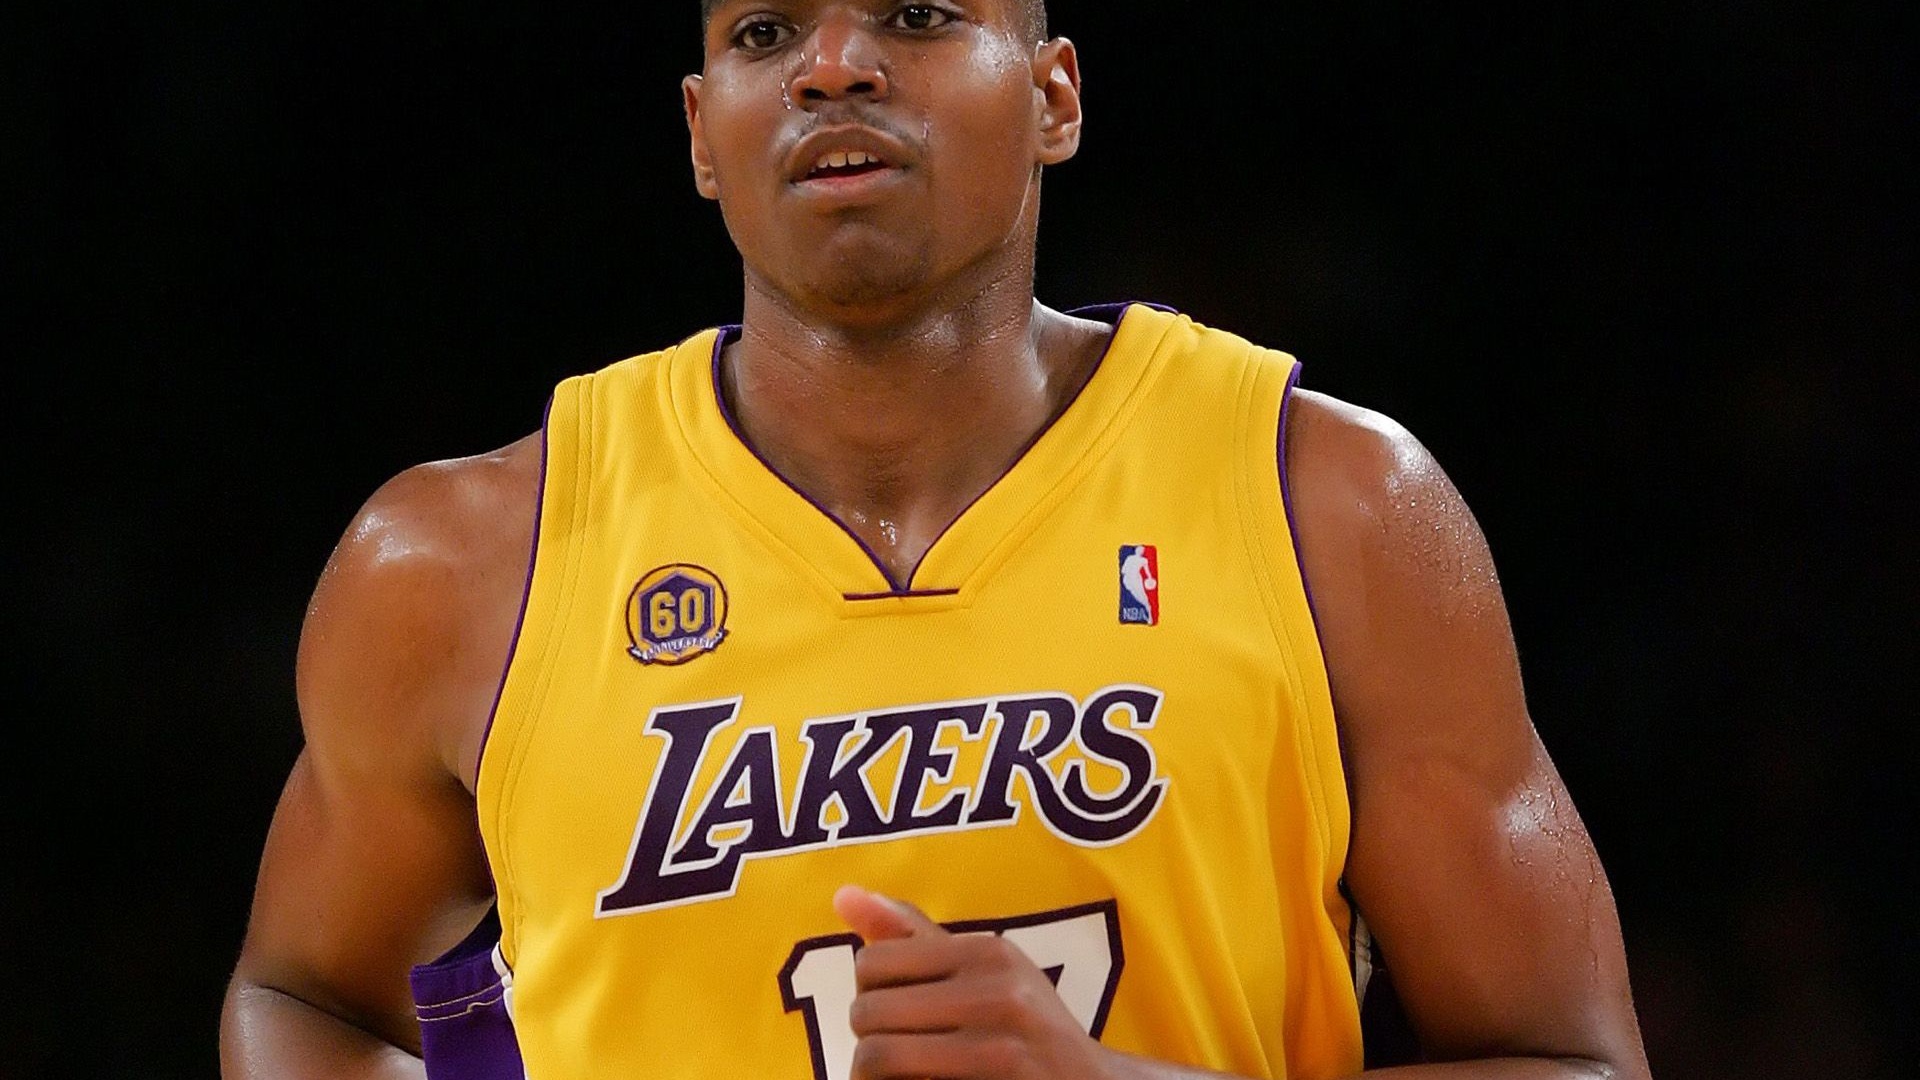 Andrew Bynum Los Angeles Lakers